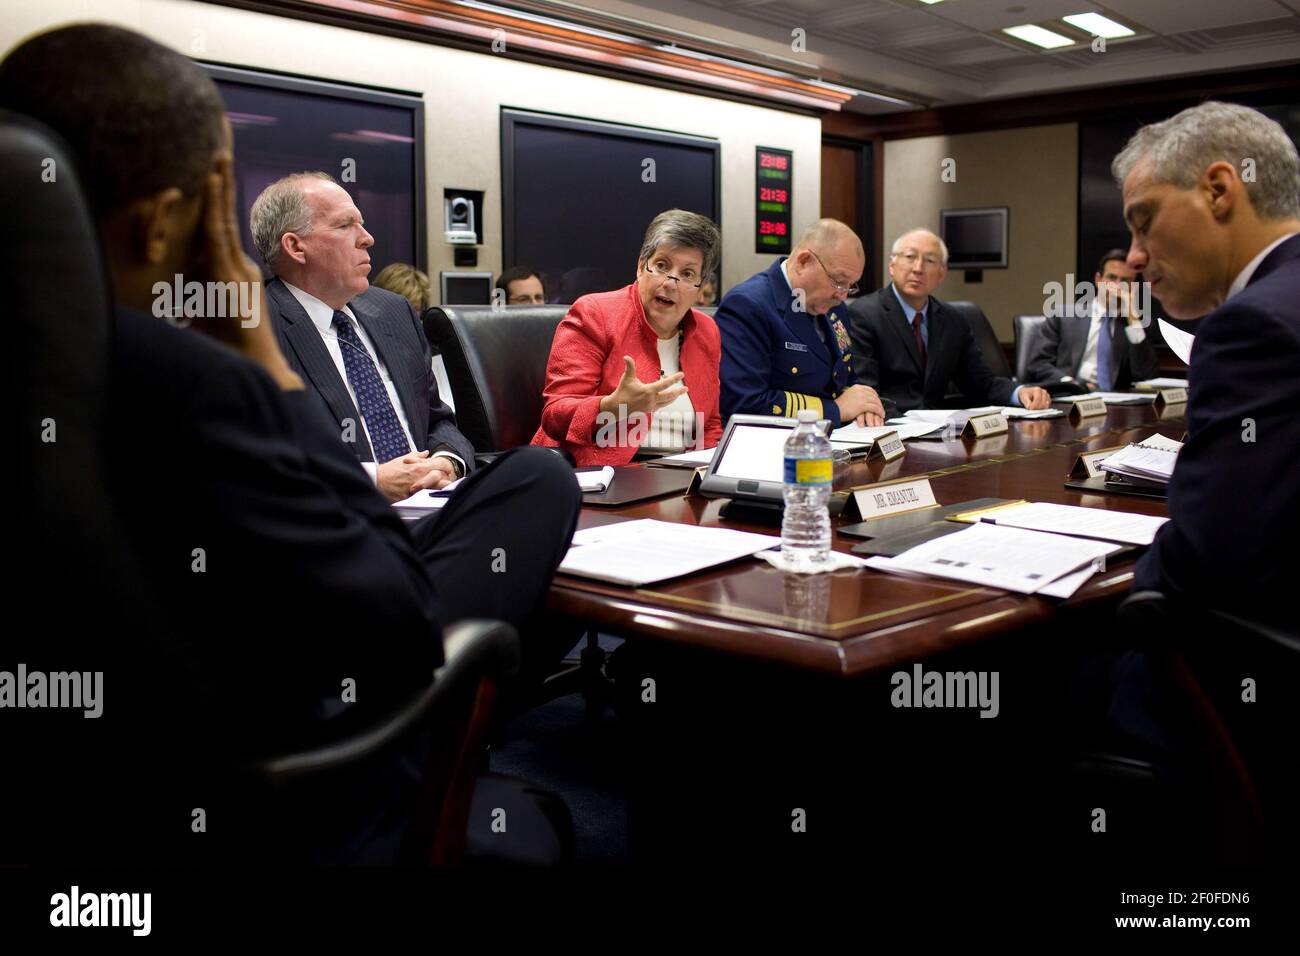 10 May 2010 - Washington, D.C.- President Barack Obama meets with several Cabinet members and senior administration officials, including, from left, Assistant to the President for Homeland Security and Counterterrorism John Brennan, Homeland Security Secretary Janet Napolitano, Admiral Thad W. Allen, Commandant of the United States Coast Guard, Interior Secretary Ken Salazar, Energy Secretary Steven Chu, Office of Management and Budget Director Peter Orszag, and Chief of Staff Rahm Emanuel, in the Situation Room of the White House, to review BP efforts to stop the oil leak in the Gulf Of Mexic Stock Photo